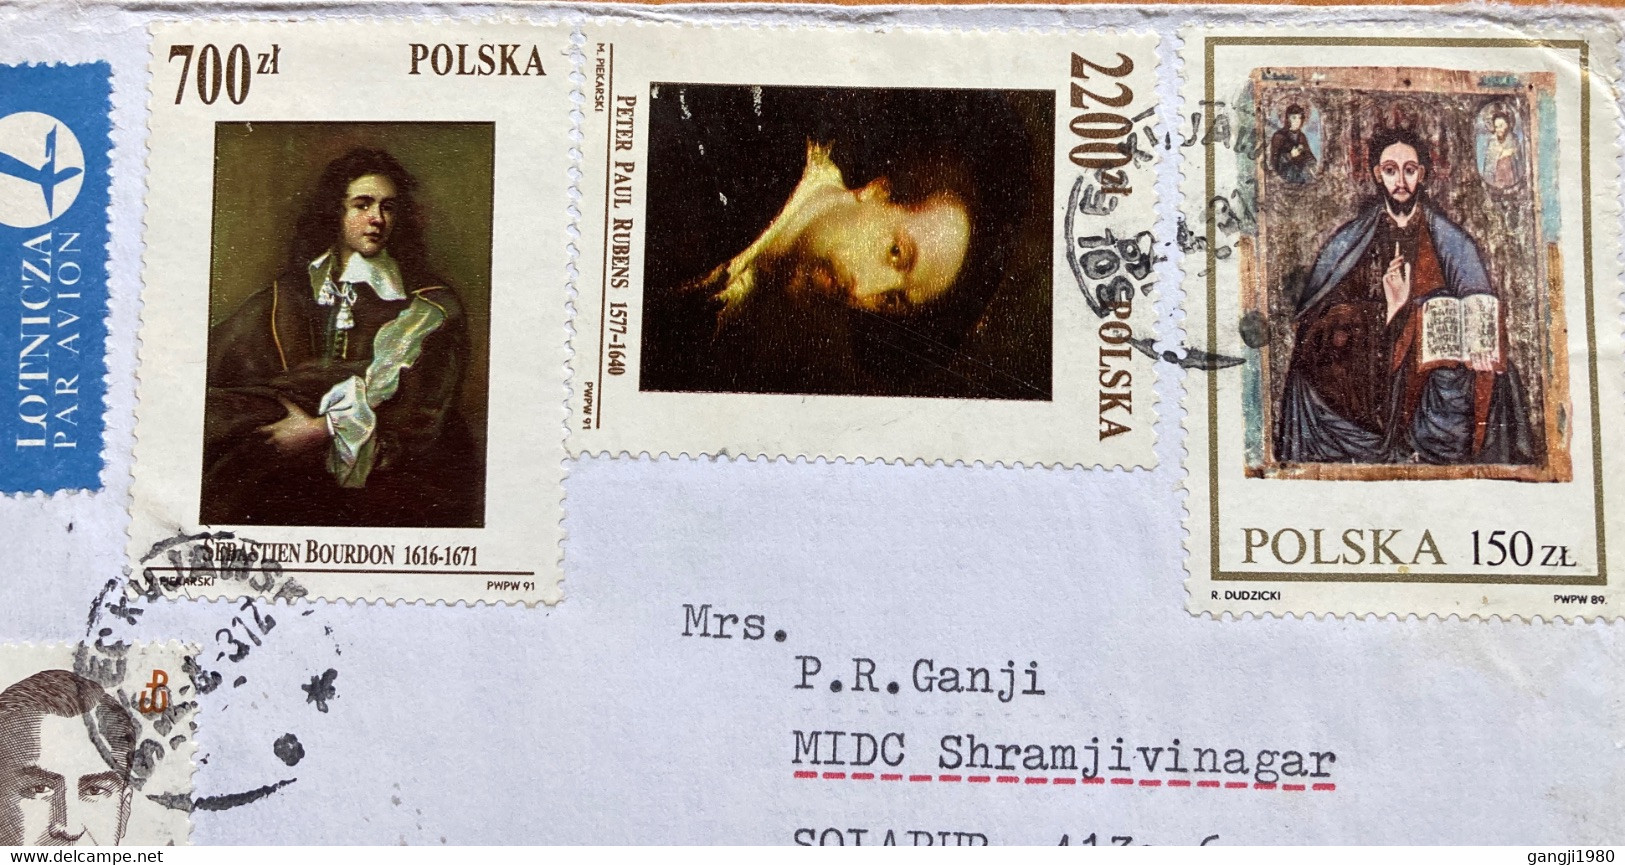 POLAND 2002, ART,PAINTING,RUBENS BOURDON ,CHRIST RELIGION,4 STAMPS 9550ZT RATE!! AIRMAIL COVER TO INDIA,SOLEC -KUJAWSKI - Covers & Documents